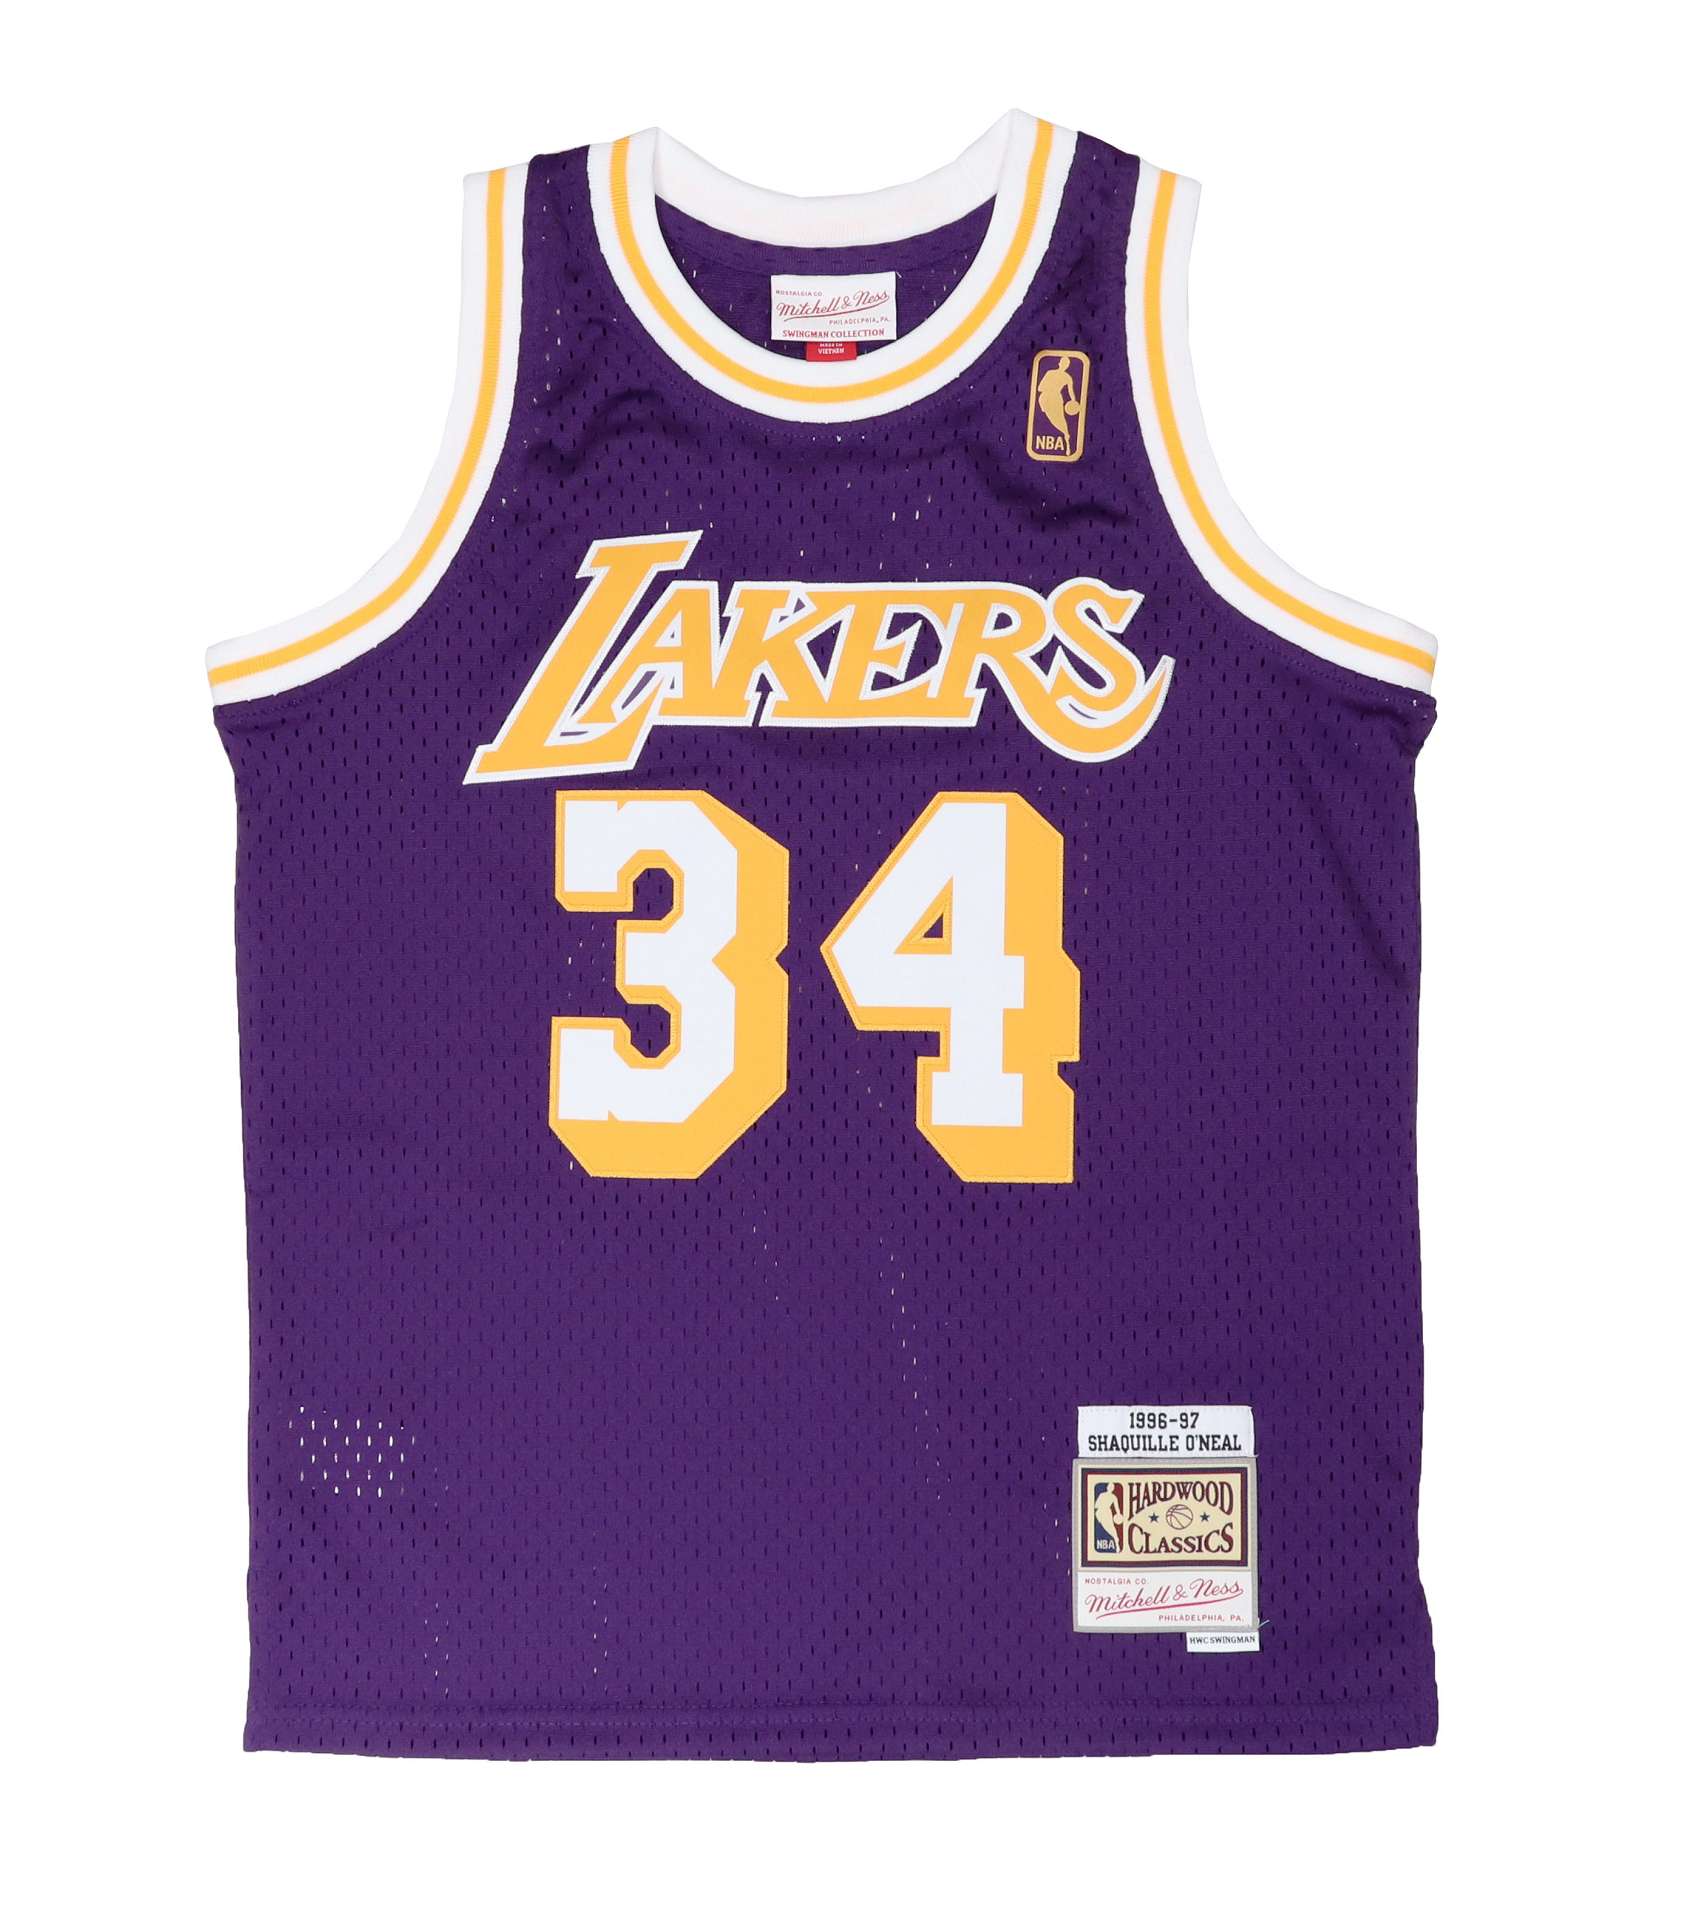 Shaquille O'Neal #34 Los Angeles Lakers NBA Kids Swingman Road Jersey Mitchell & Ness